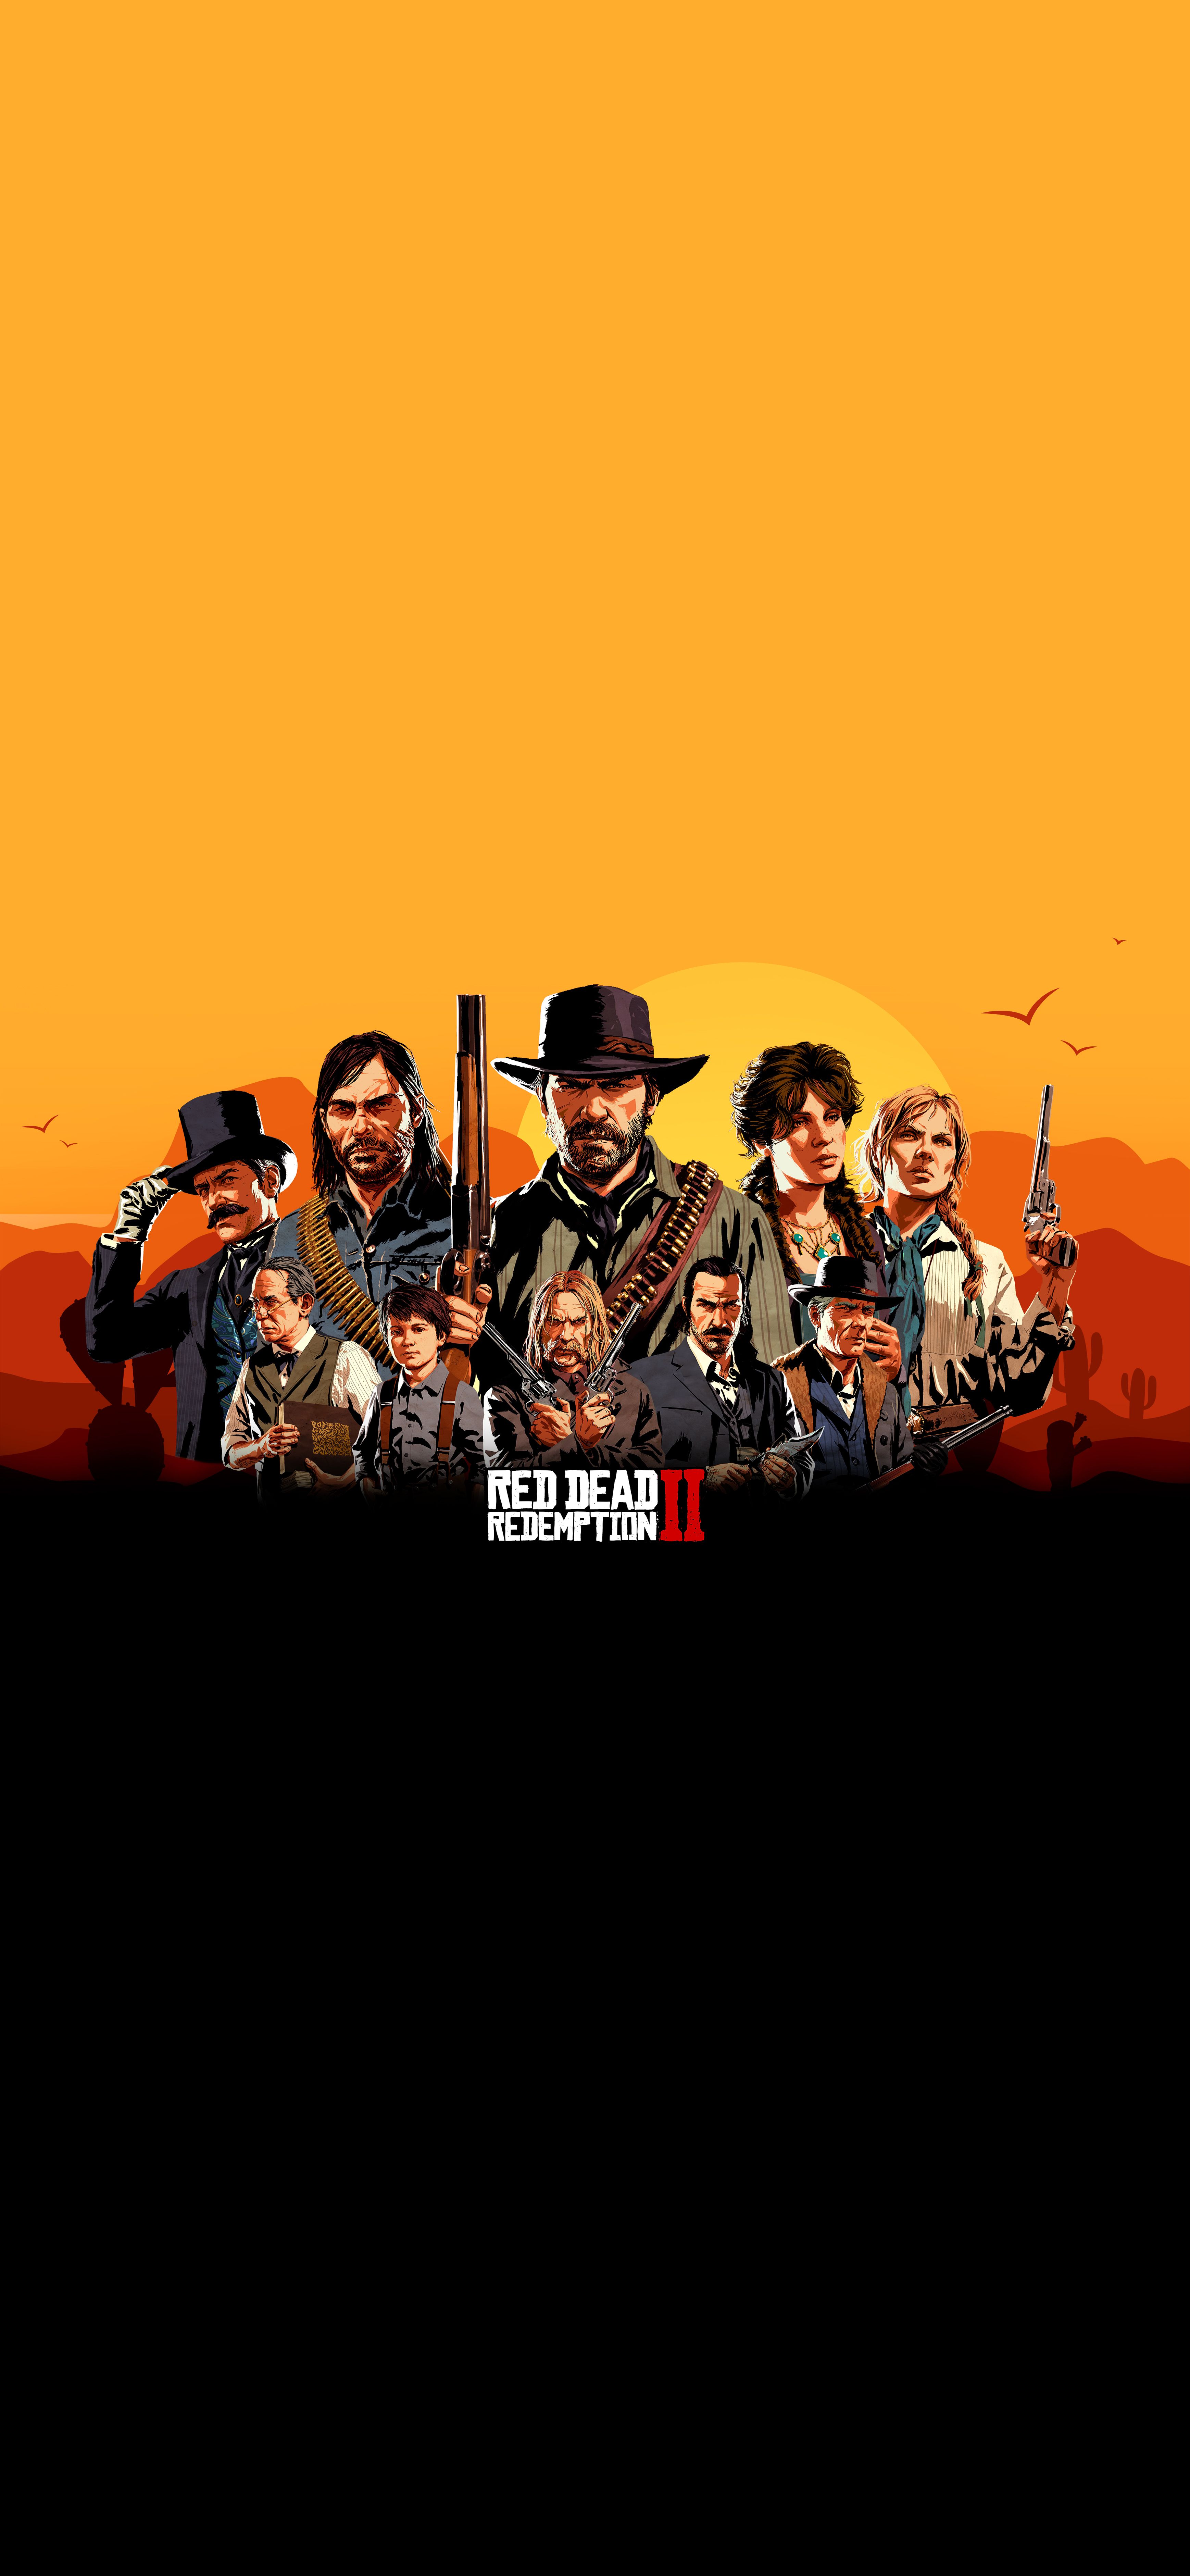 RED DEAD REDEMPTION 2 IPHONE WALLPAPER